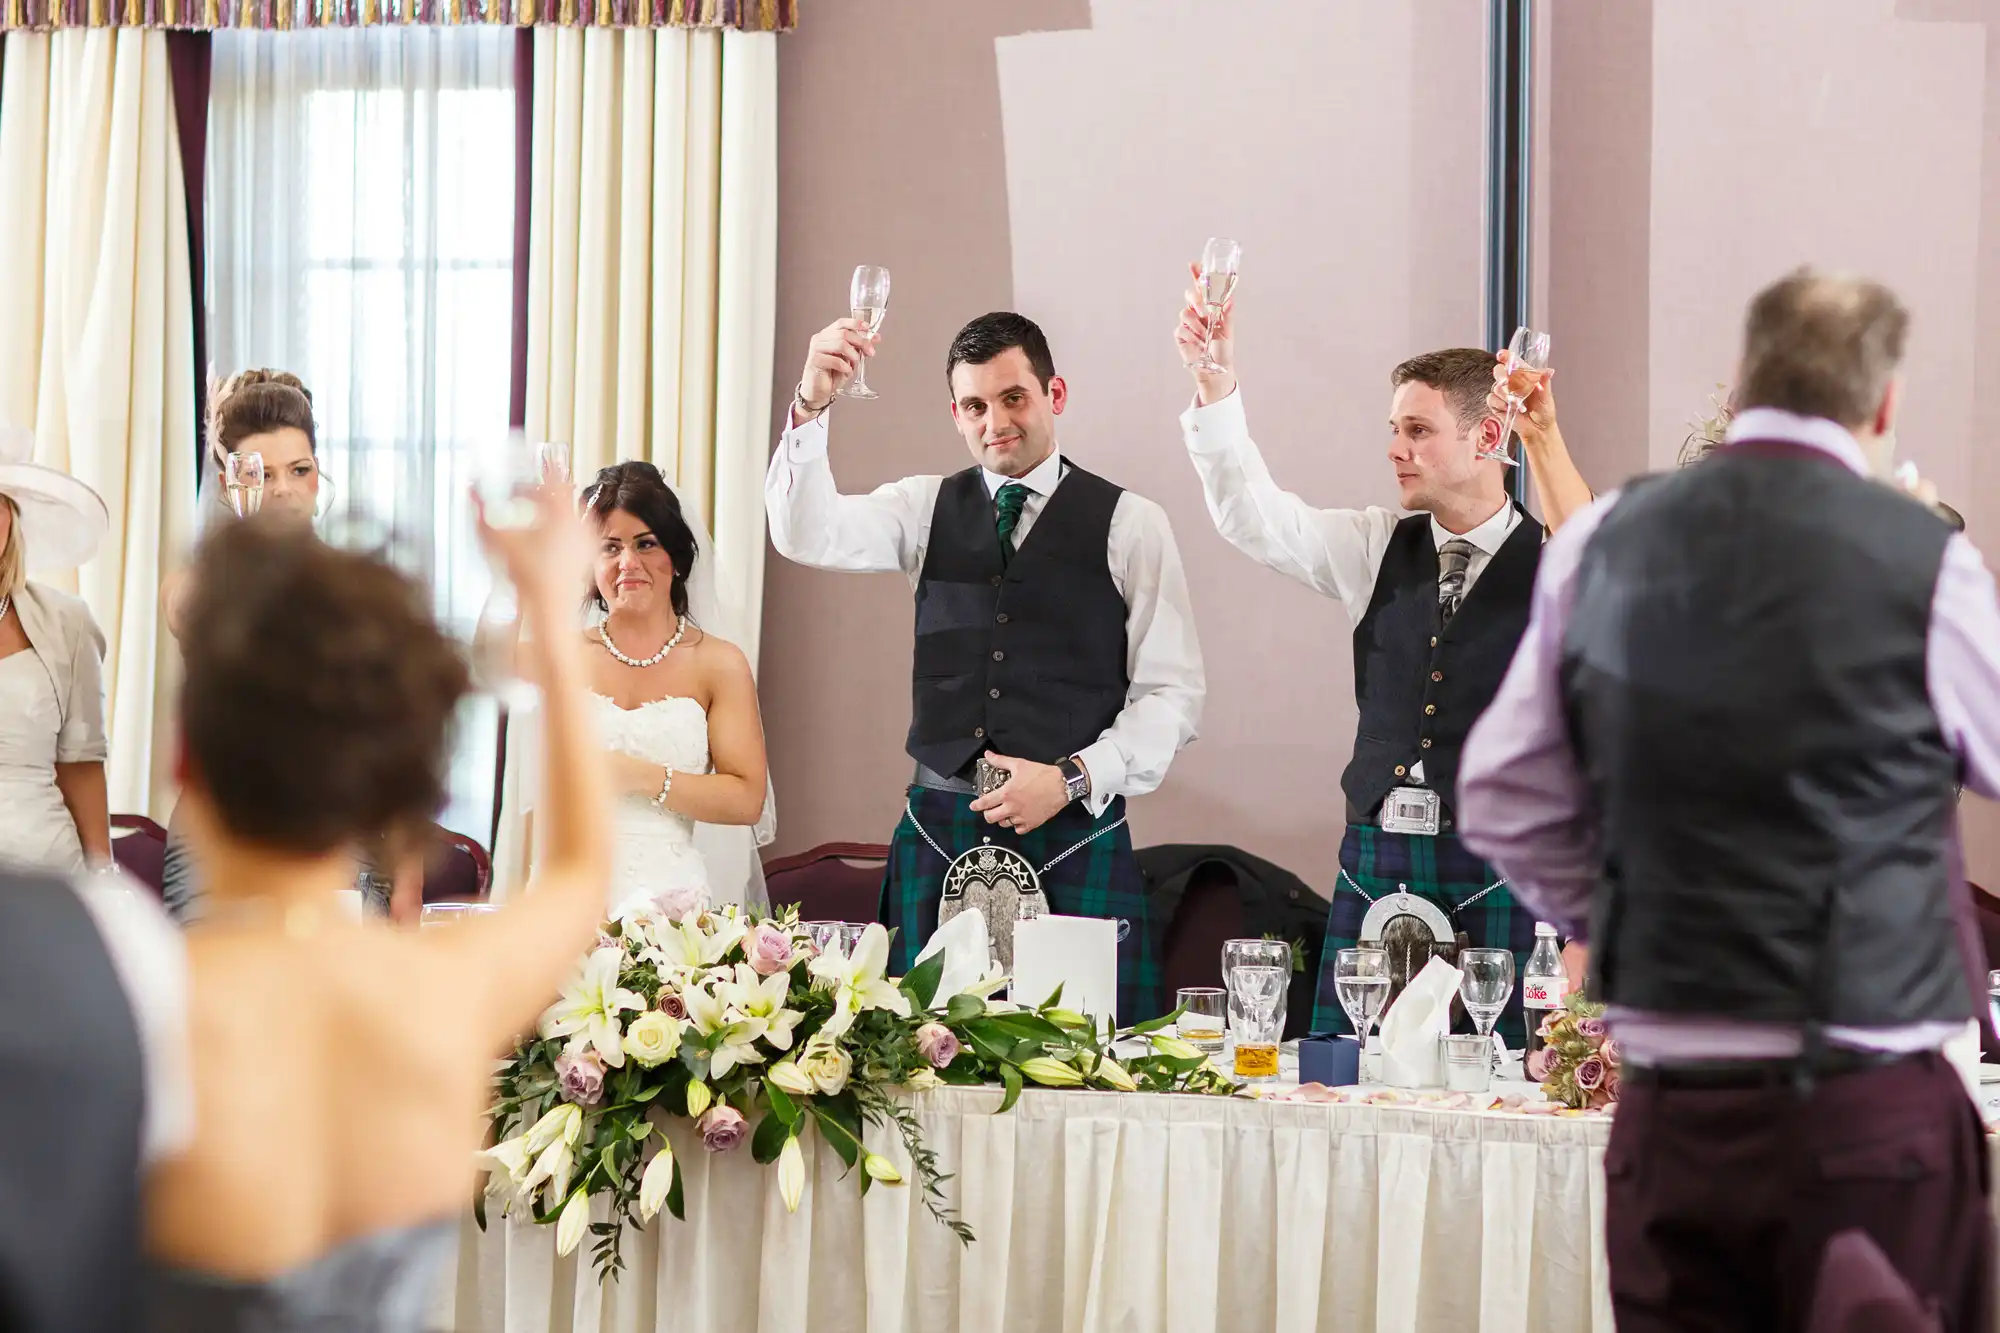 A bride and groom in traditional scottish attire raise their glasses for a toast at their wedding reception, surrounded by guests.